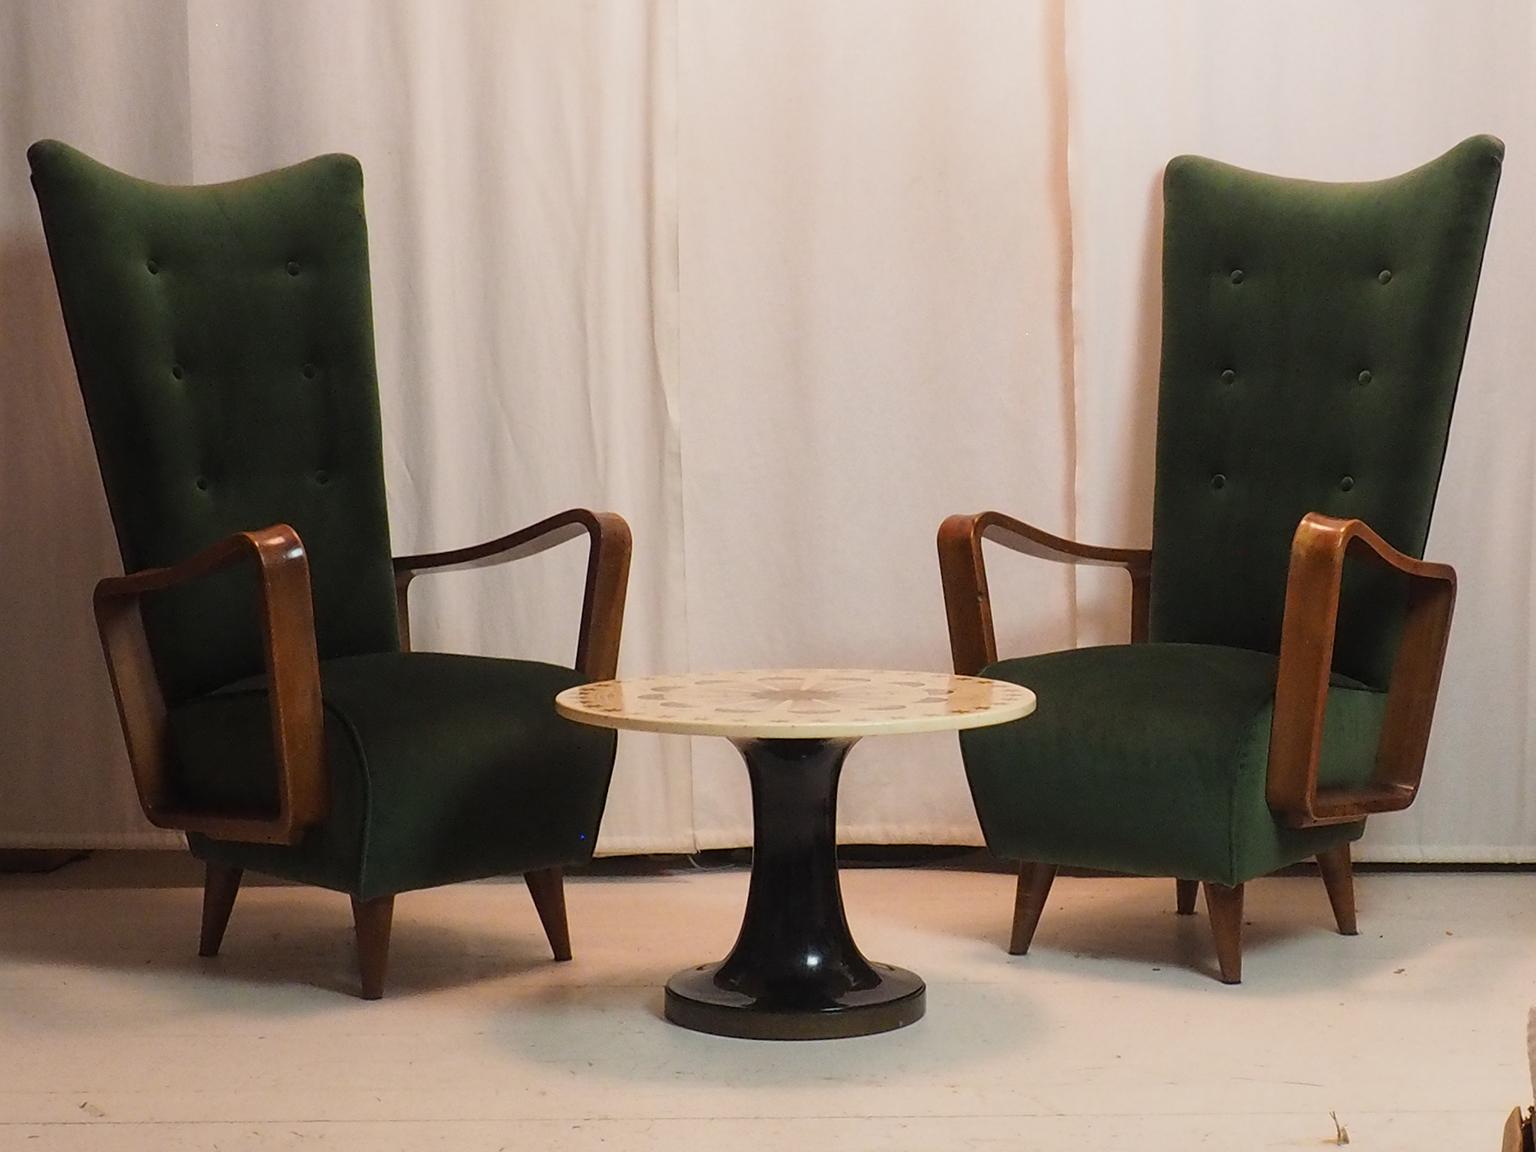 Midcentury High Back Italian Green Armchairs by Pietro Lingeri, Italy, 1950s For Sale 1